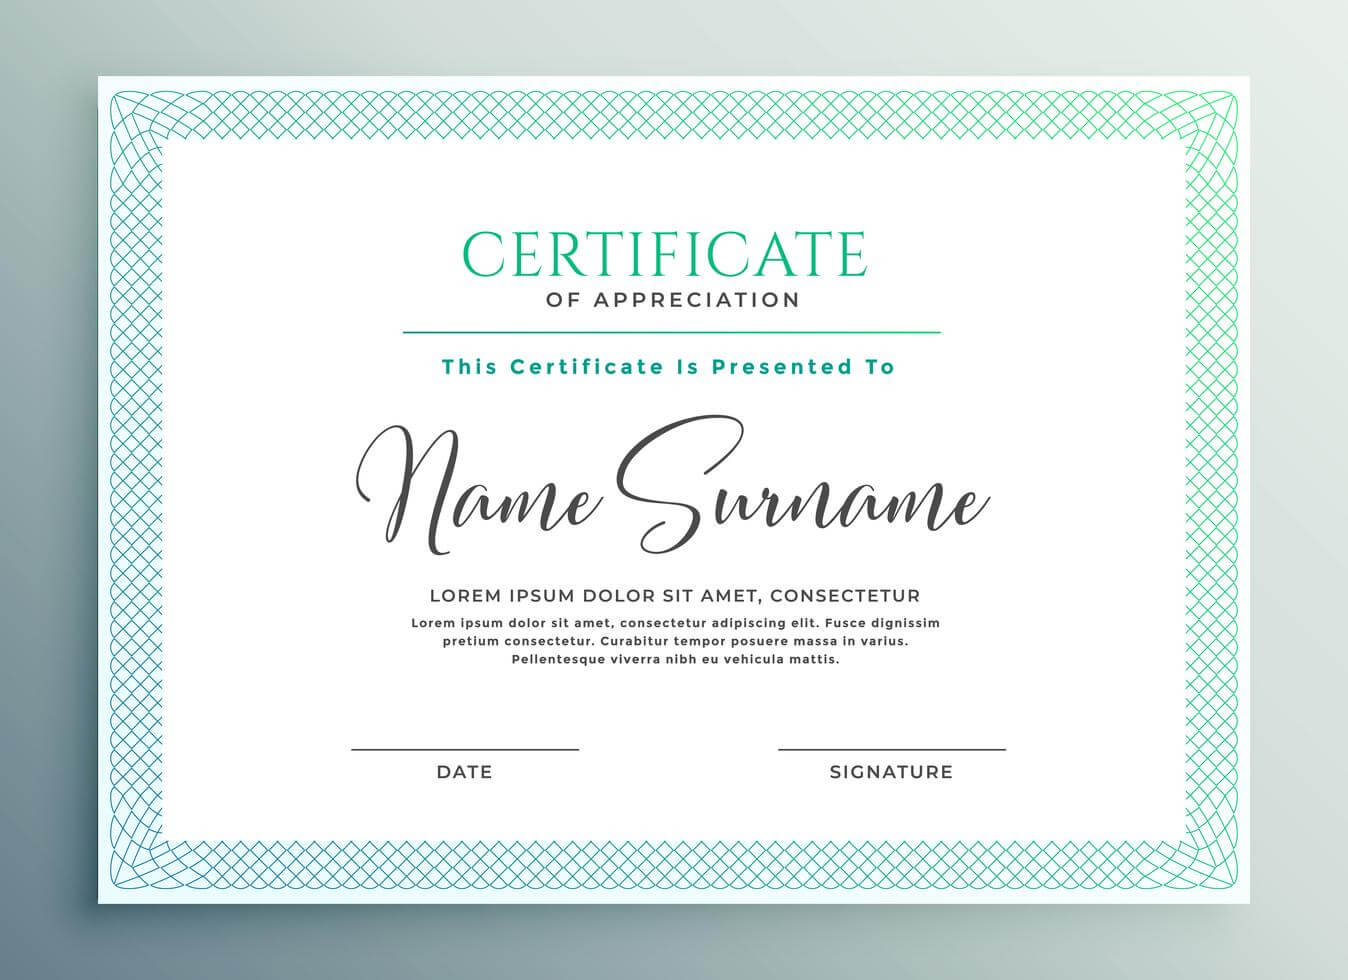 30+ Certificate Of Appreciation Download!! | Templates Study Intended For Certificate Of Appreciation Template Free Printable